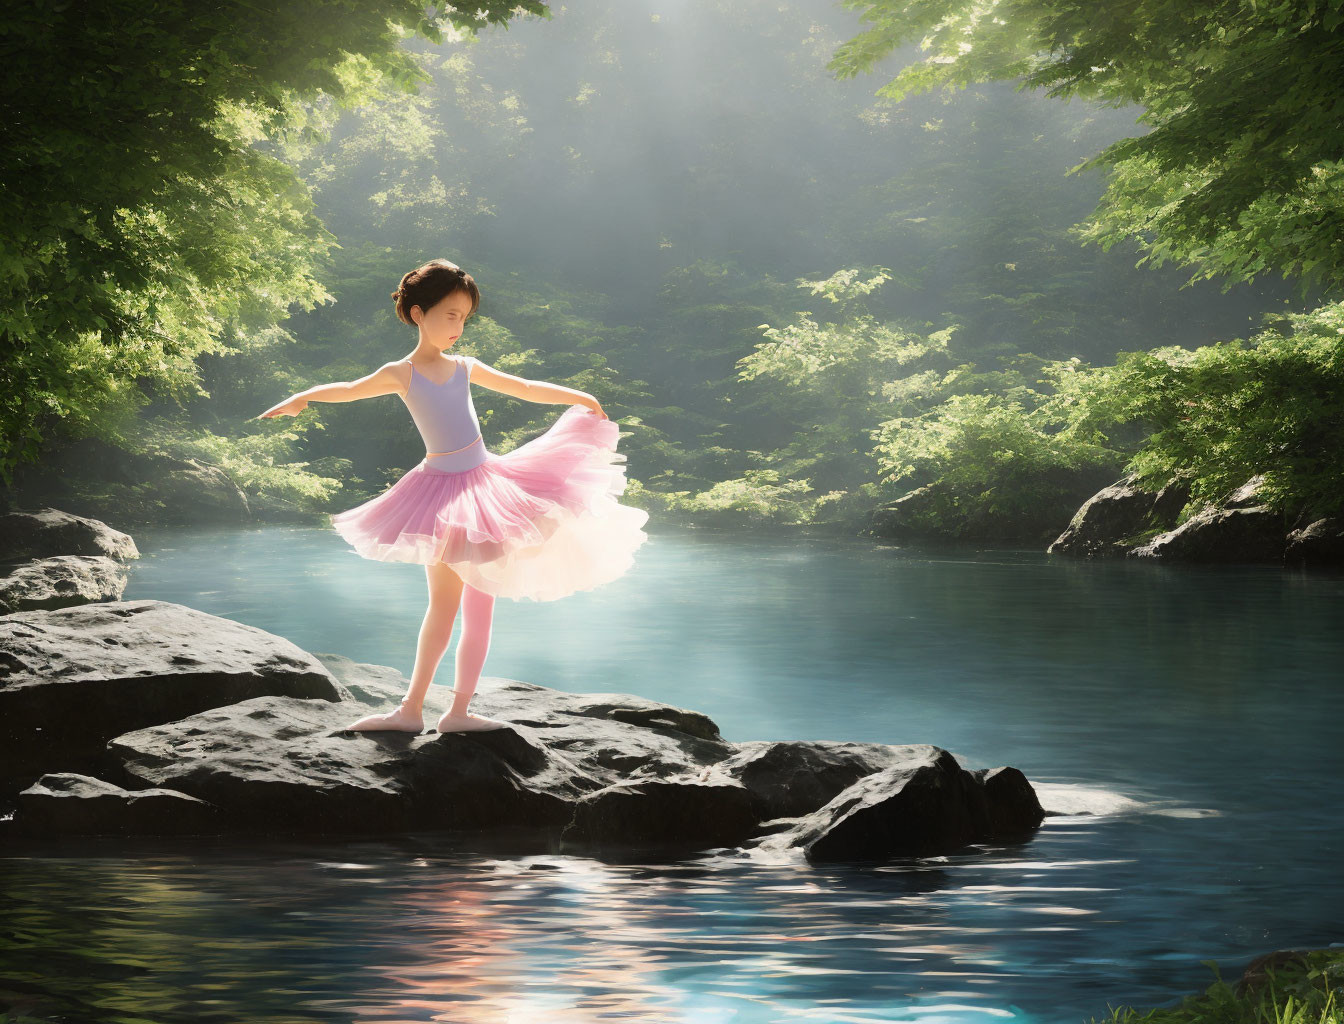 Young ballet dancer in pink tutu poses by serene forest lake